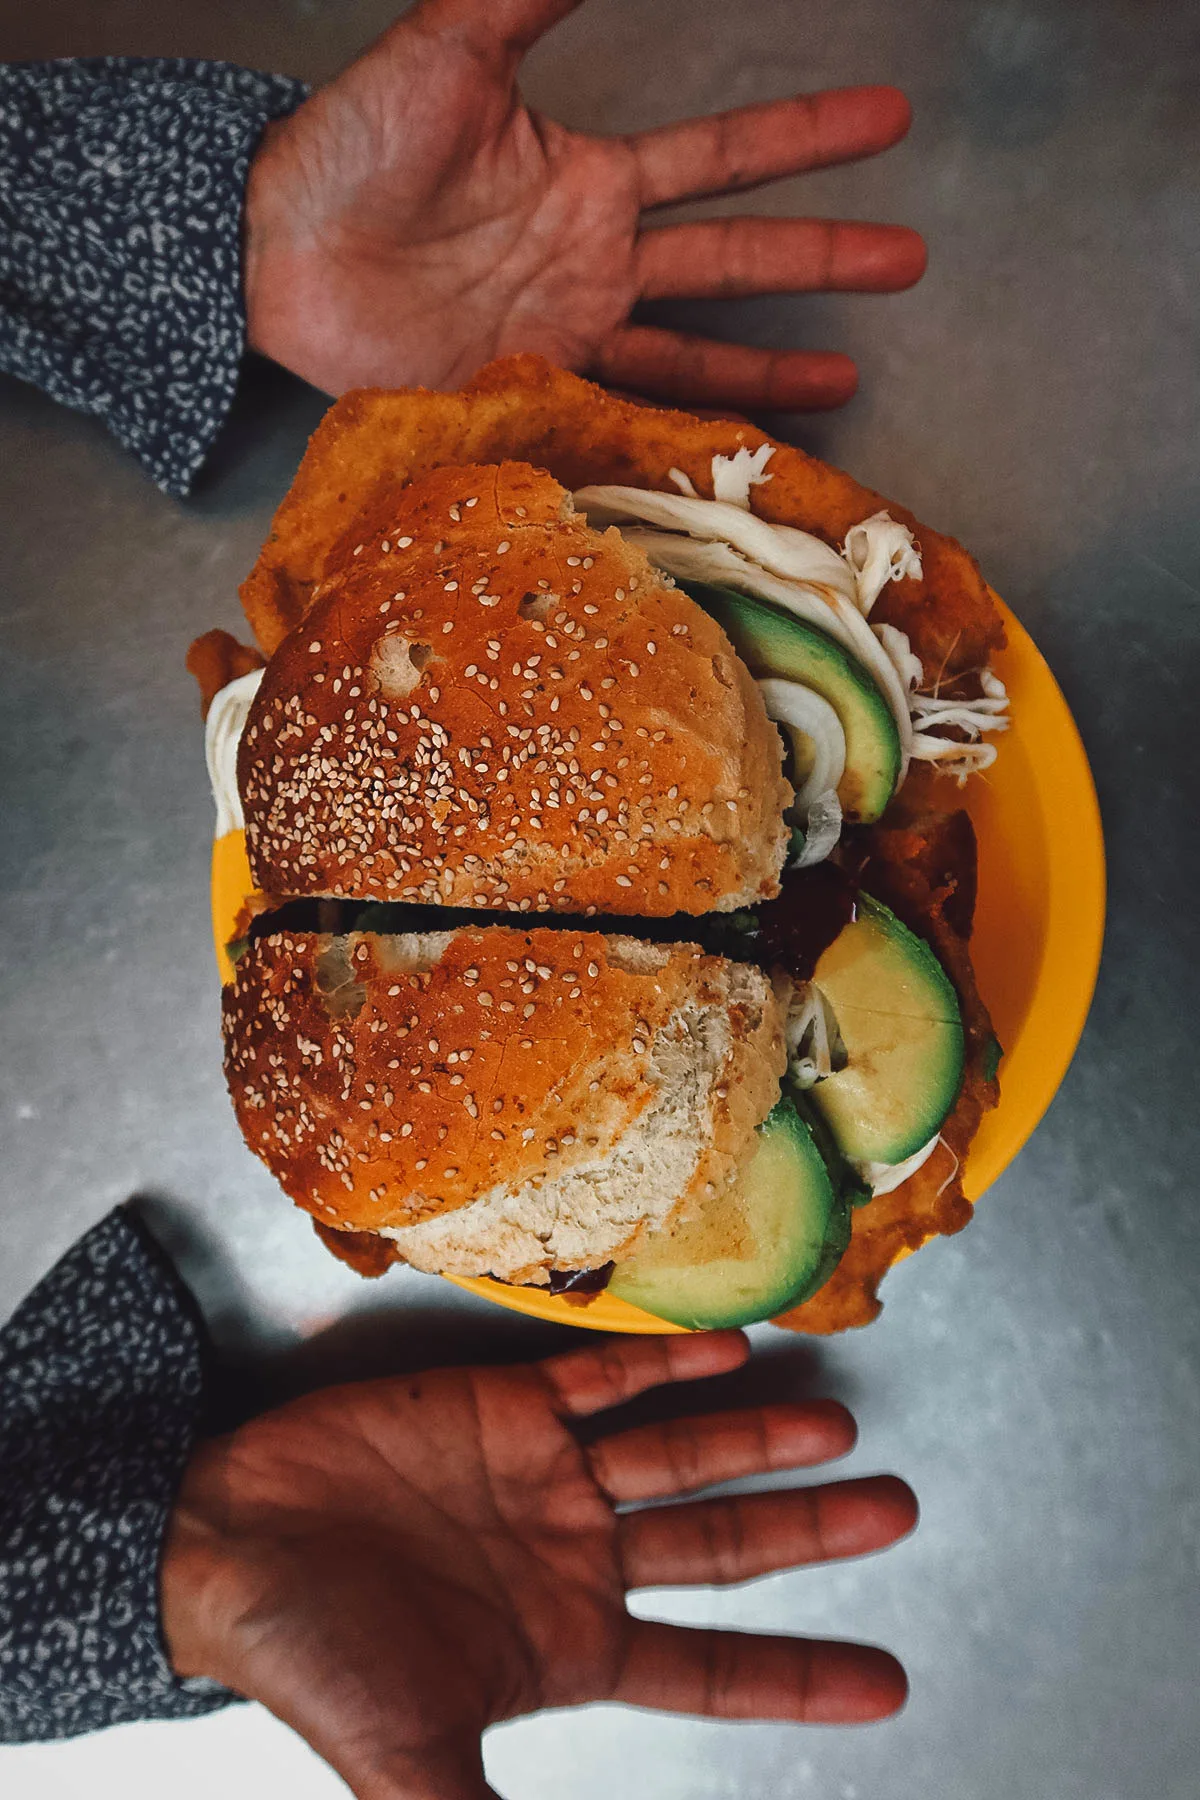 Super cemitas with hands for scale